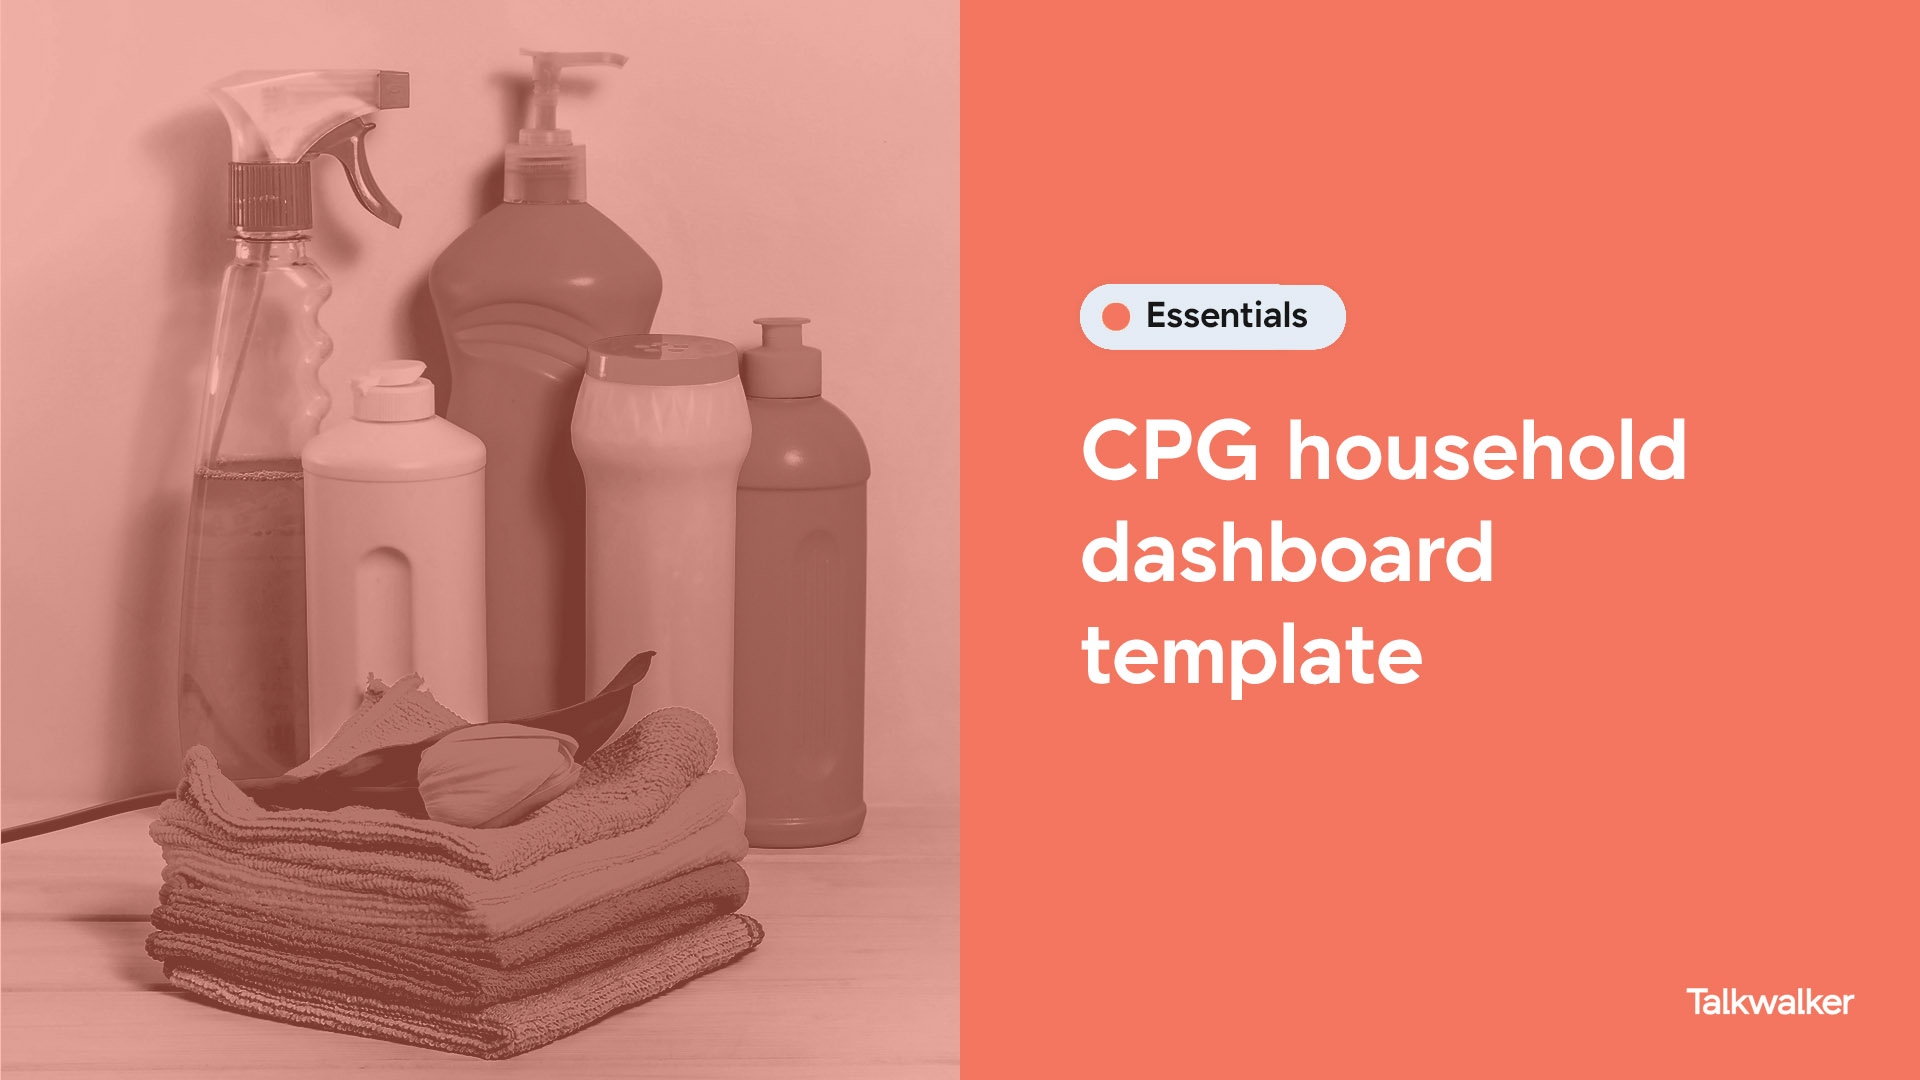 CPG household dashboard template - a variety of household cleaning products sit on a shelf